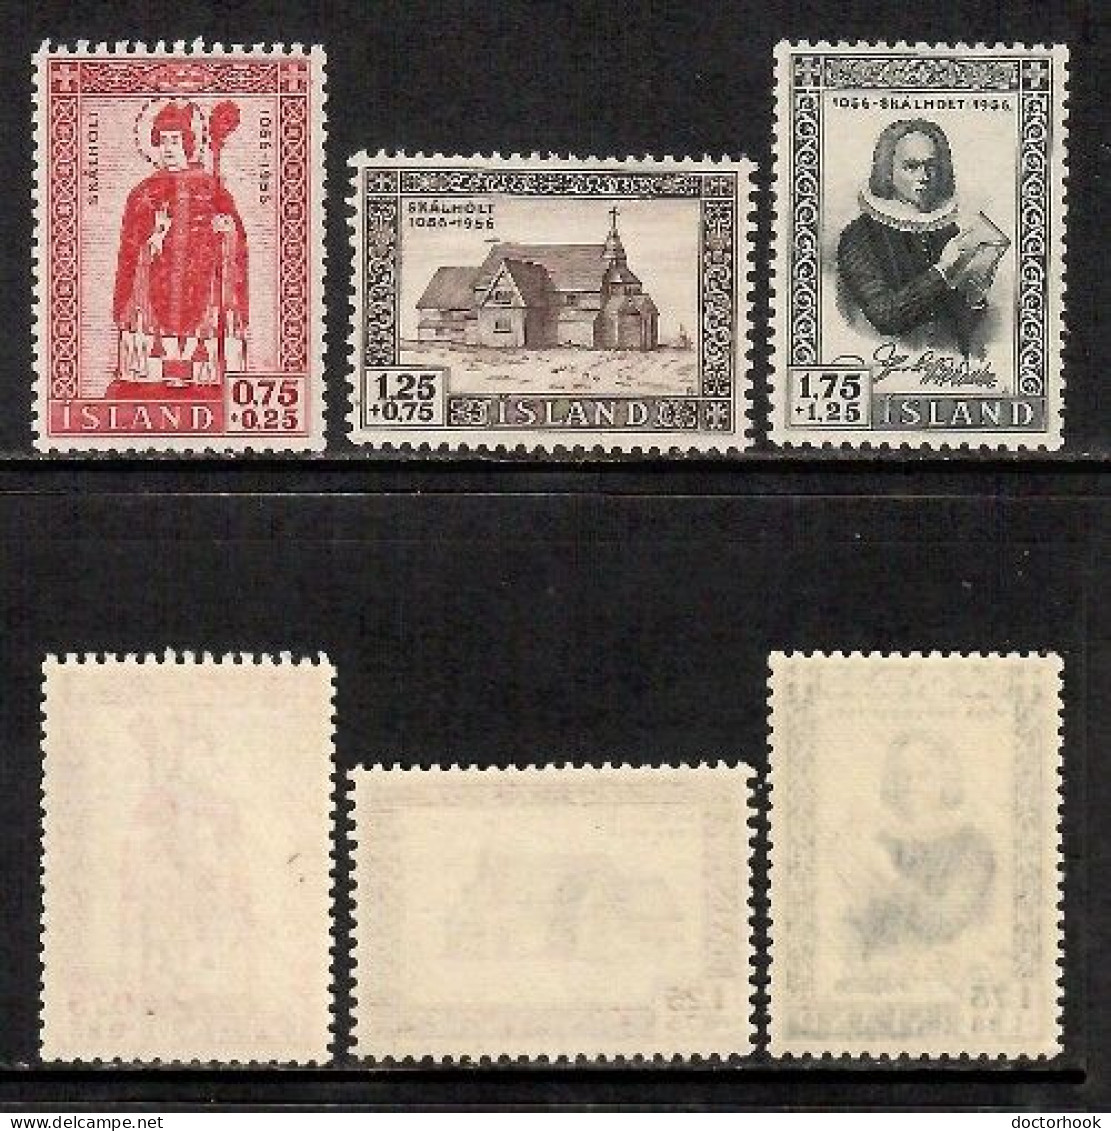 ICELAND   Scott # B 14-6** MINT NH (CONDITION AS PER SCAN) (Stamp Scan # 996-9) - Unused Stamps